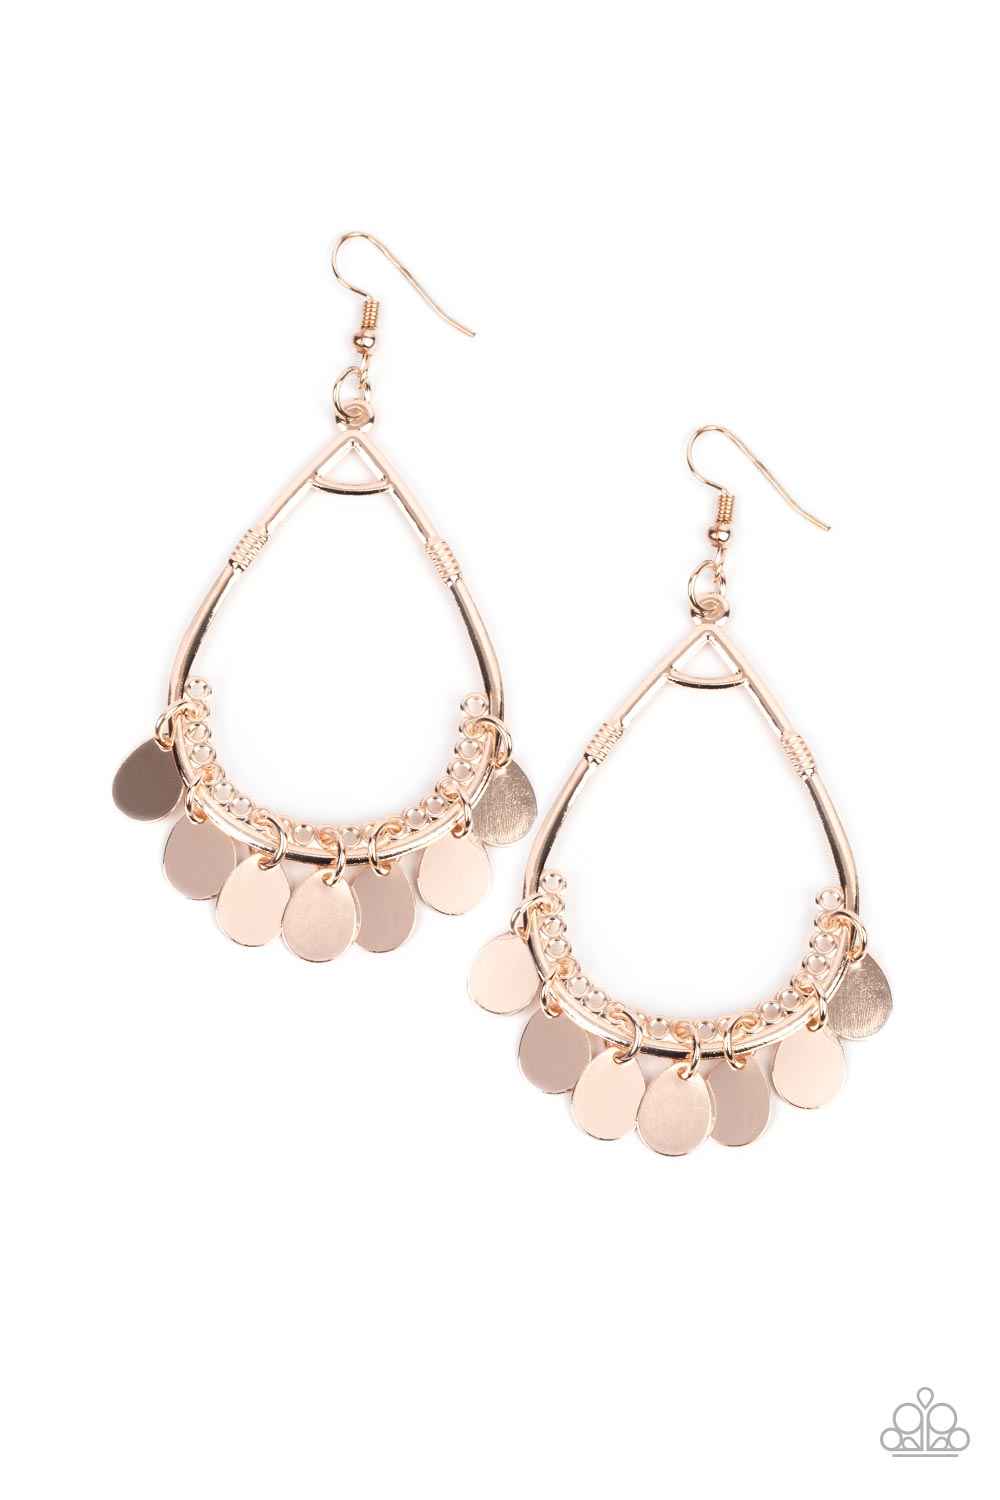 Meet Your Music Maker Paparazzi Accessories Earrings Rose Gold